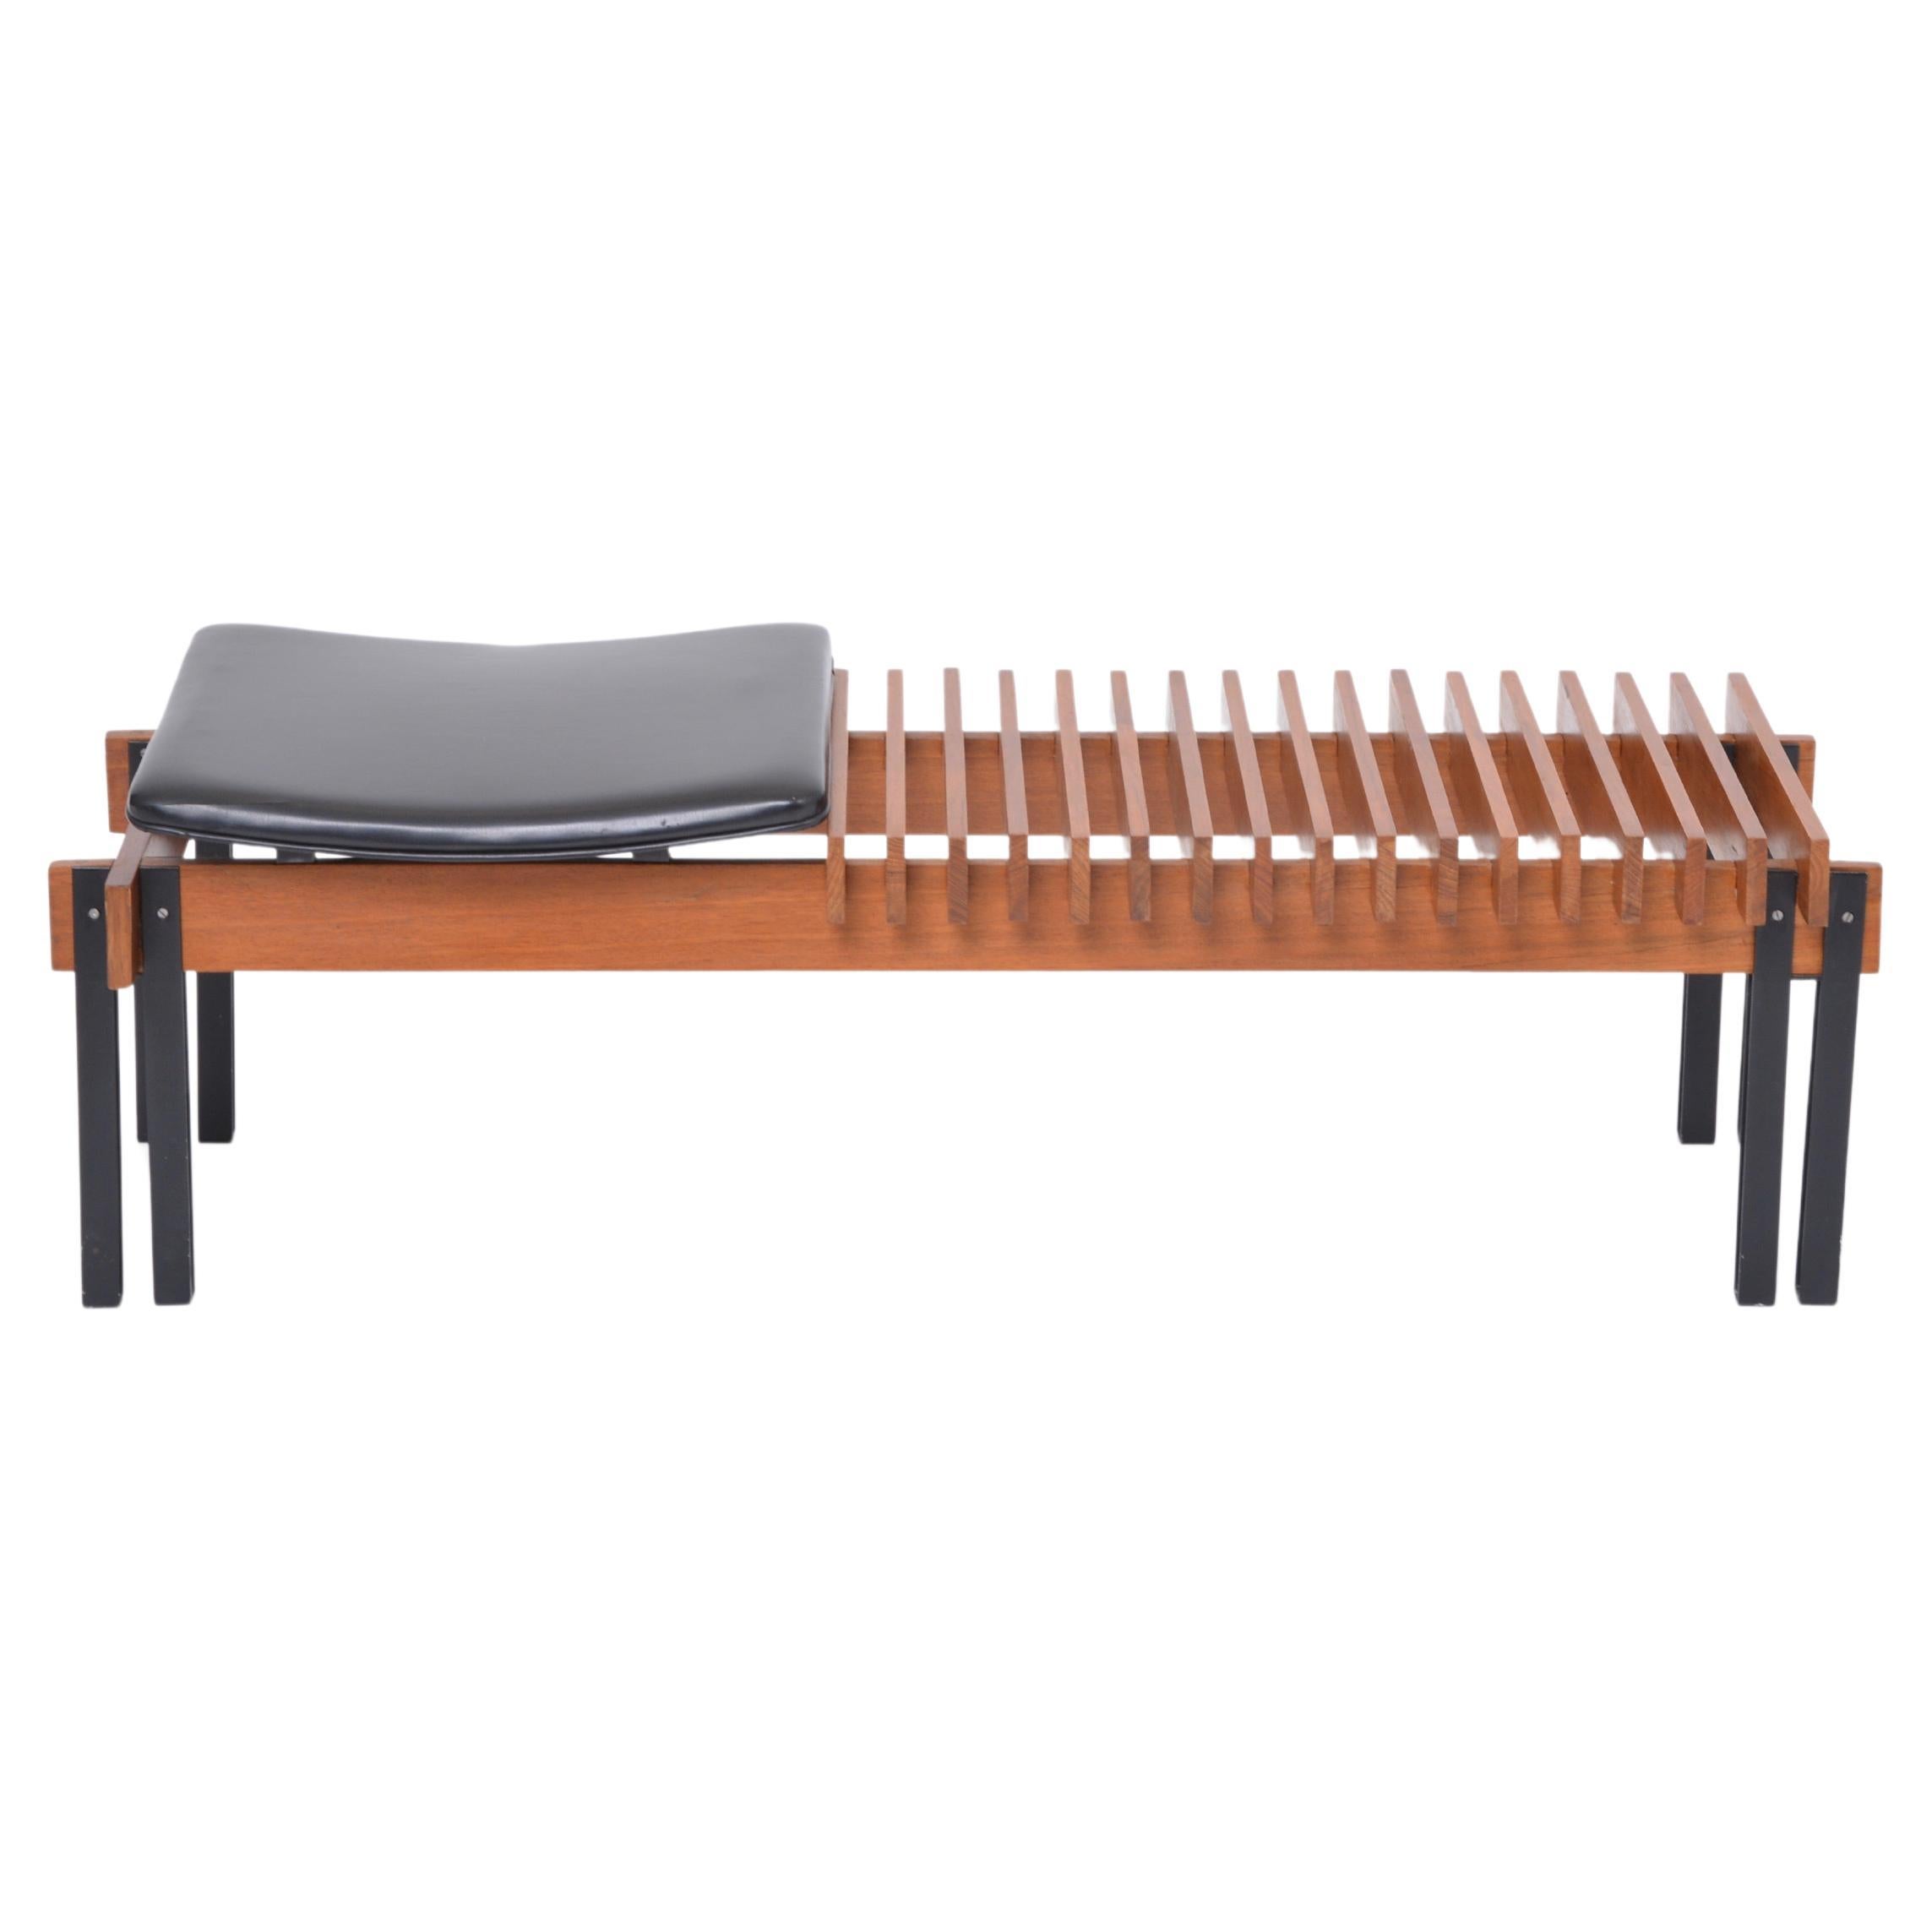 Mid-Century Modern slatted Teak bench by Inge and Luciano Rubino for Apec